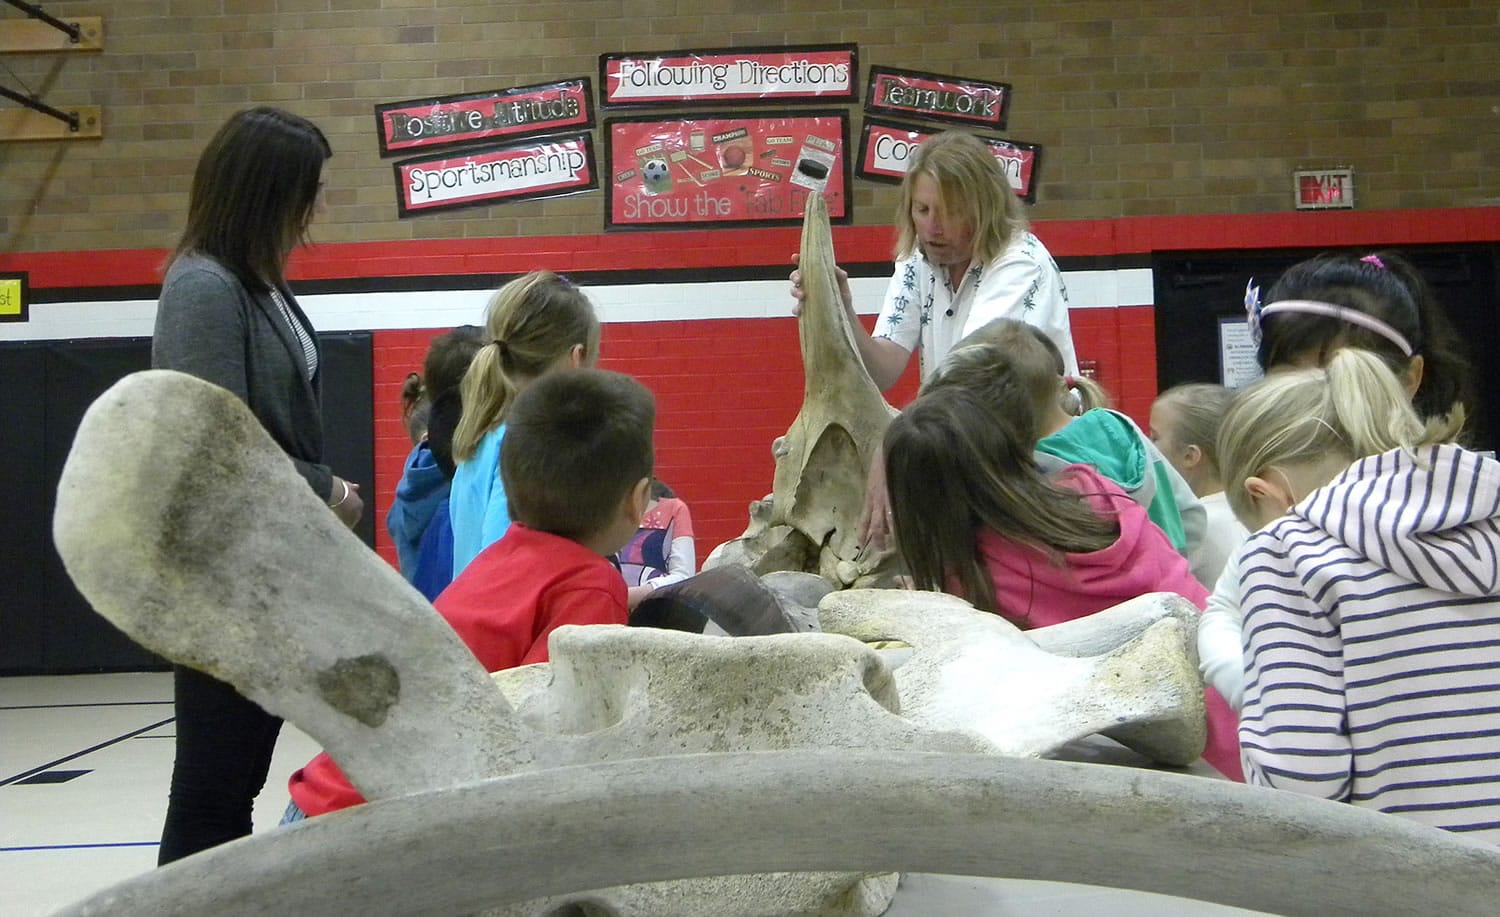 Photos by Adam Littman/The Columbian
John L. Ford shows Woodland Primary School first-graders different whale bones as part of his annual program at the school, which celebrated its 30th anniversary on Wednesday.